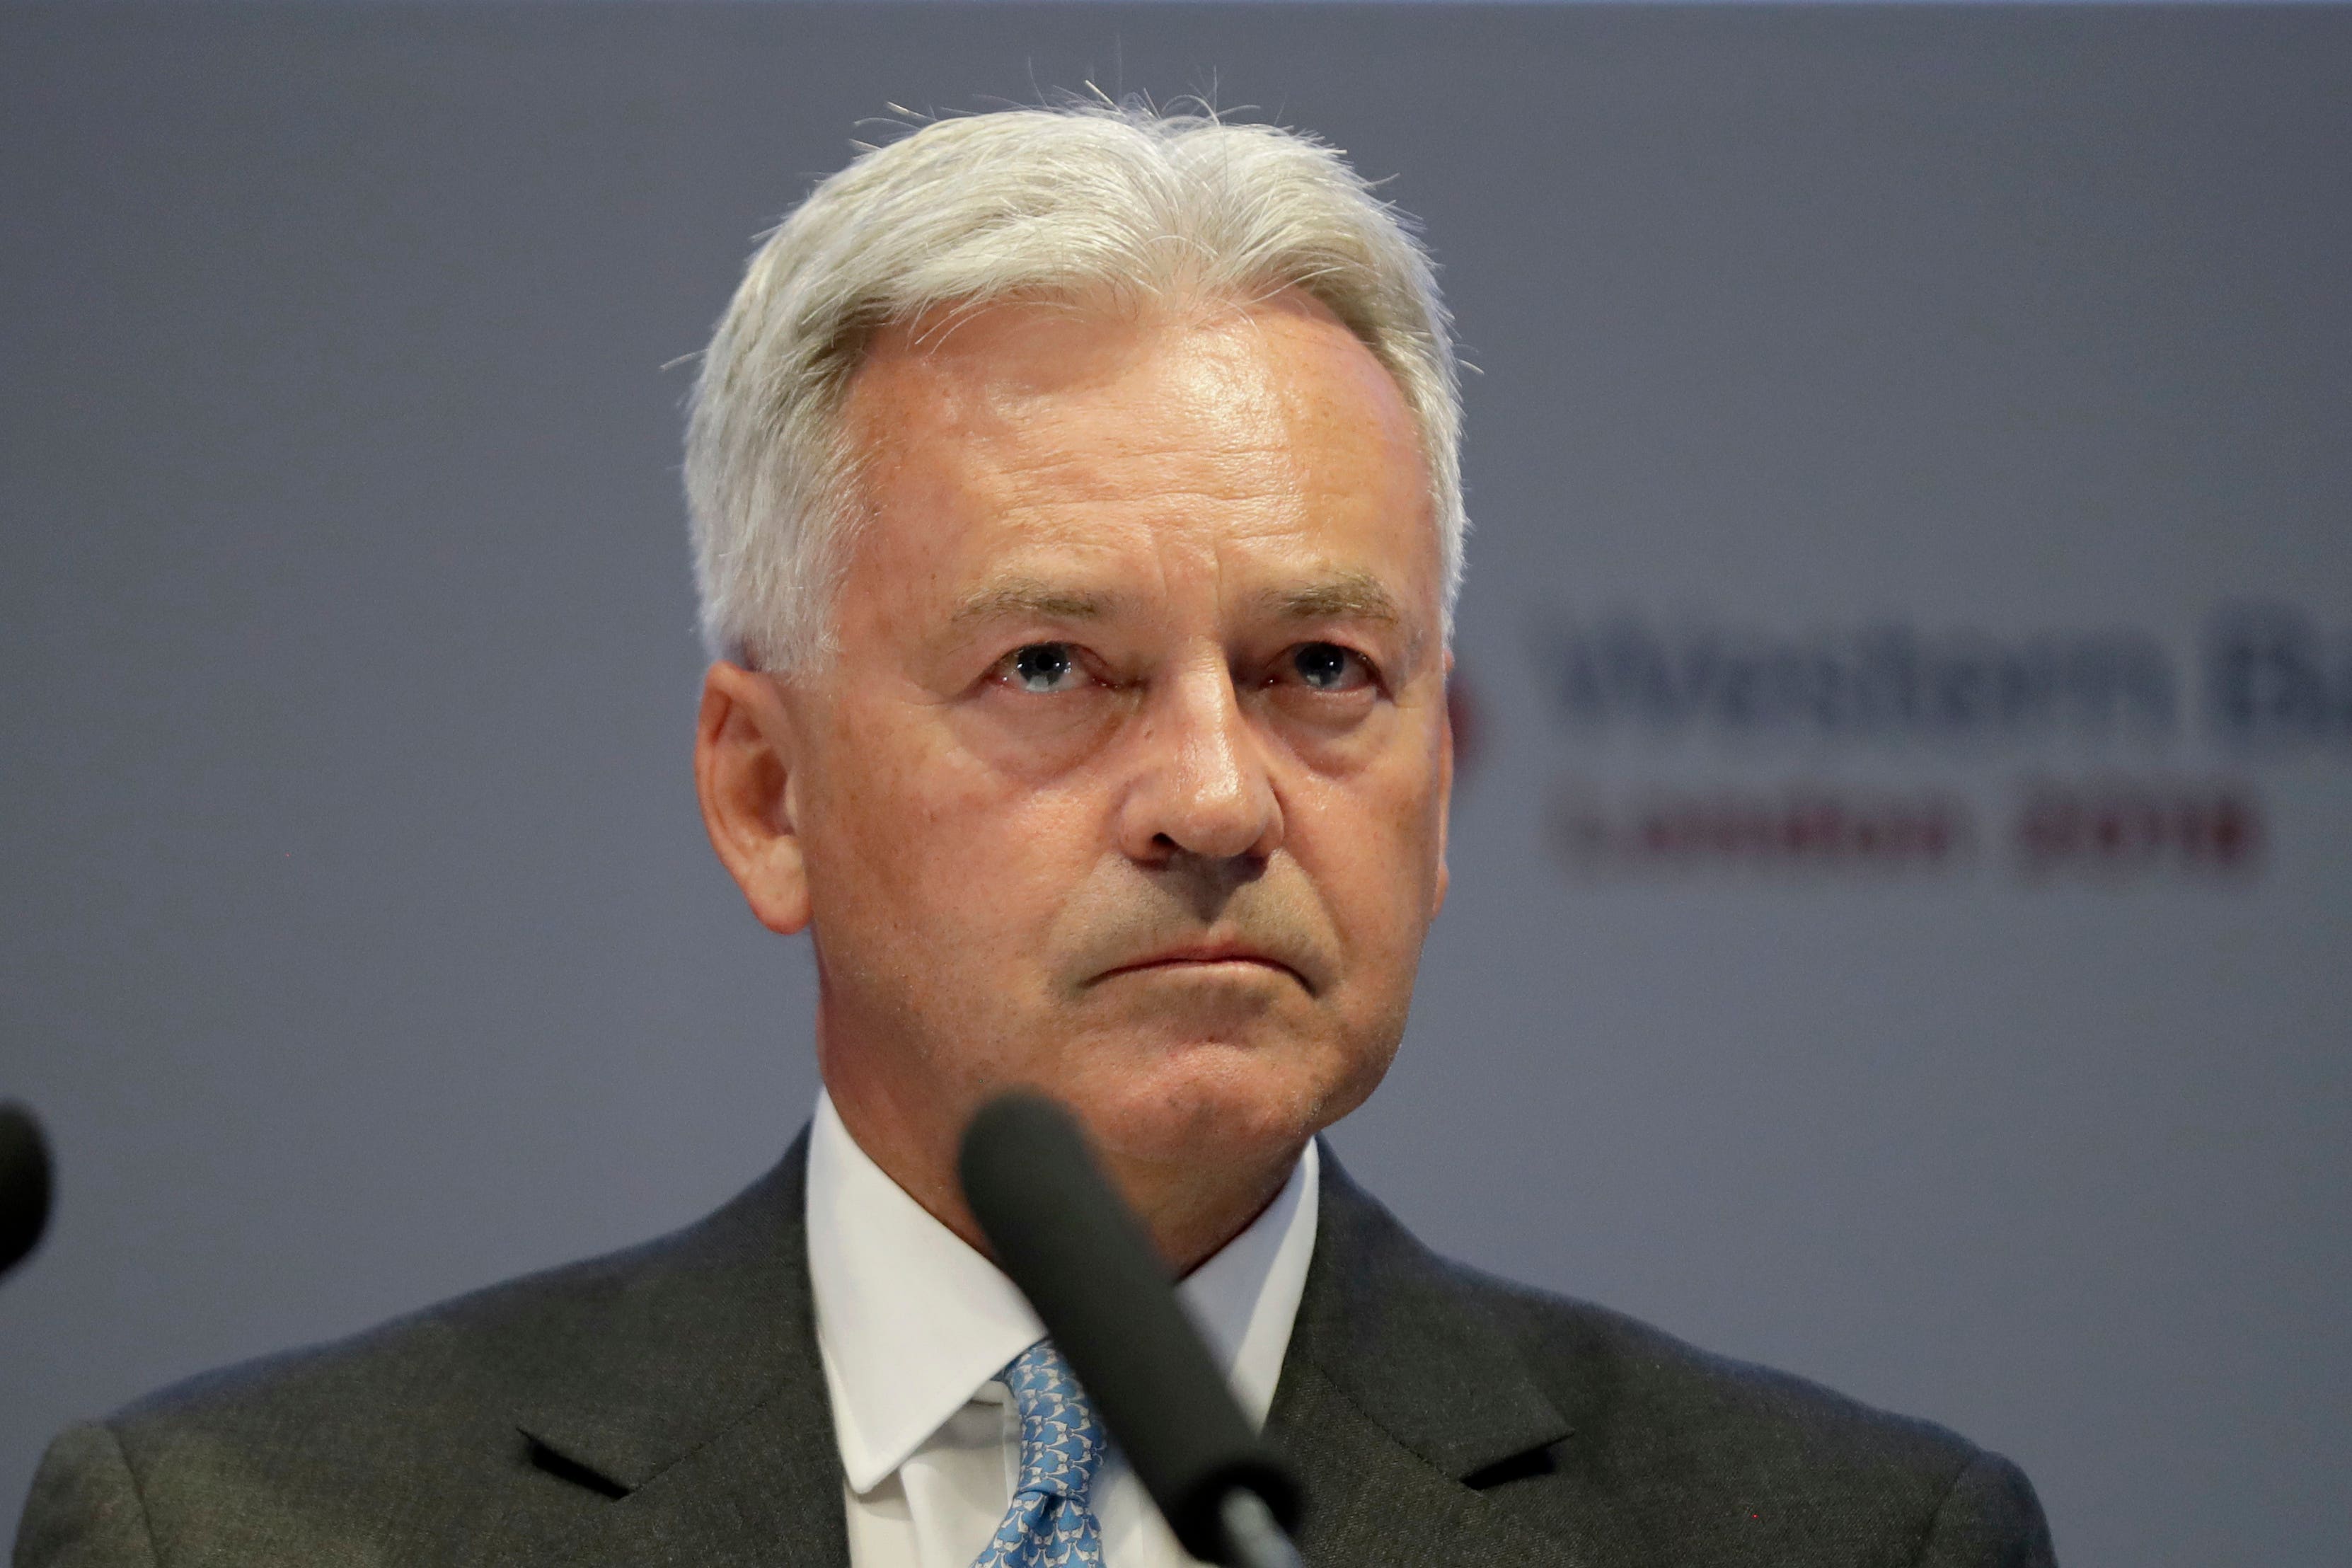 Former deputy foreign secretary Alan Duncan could be expelled from the Conservative Party after calling for action against pro-Israel Tory ‘extremists’